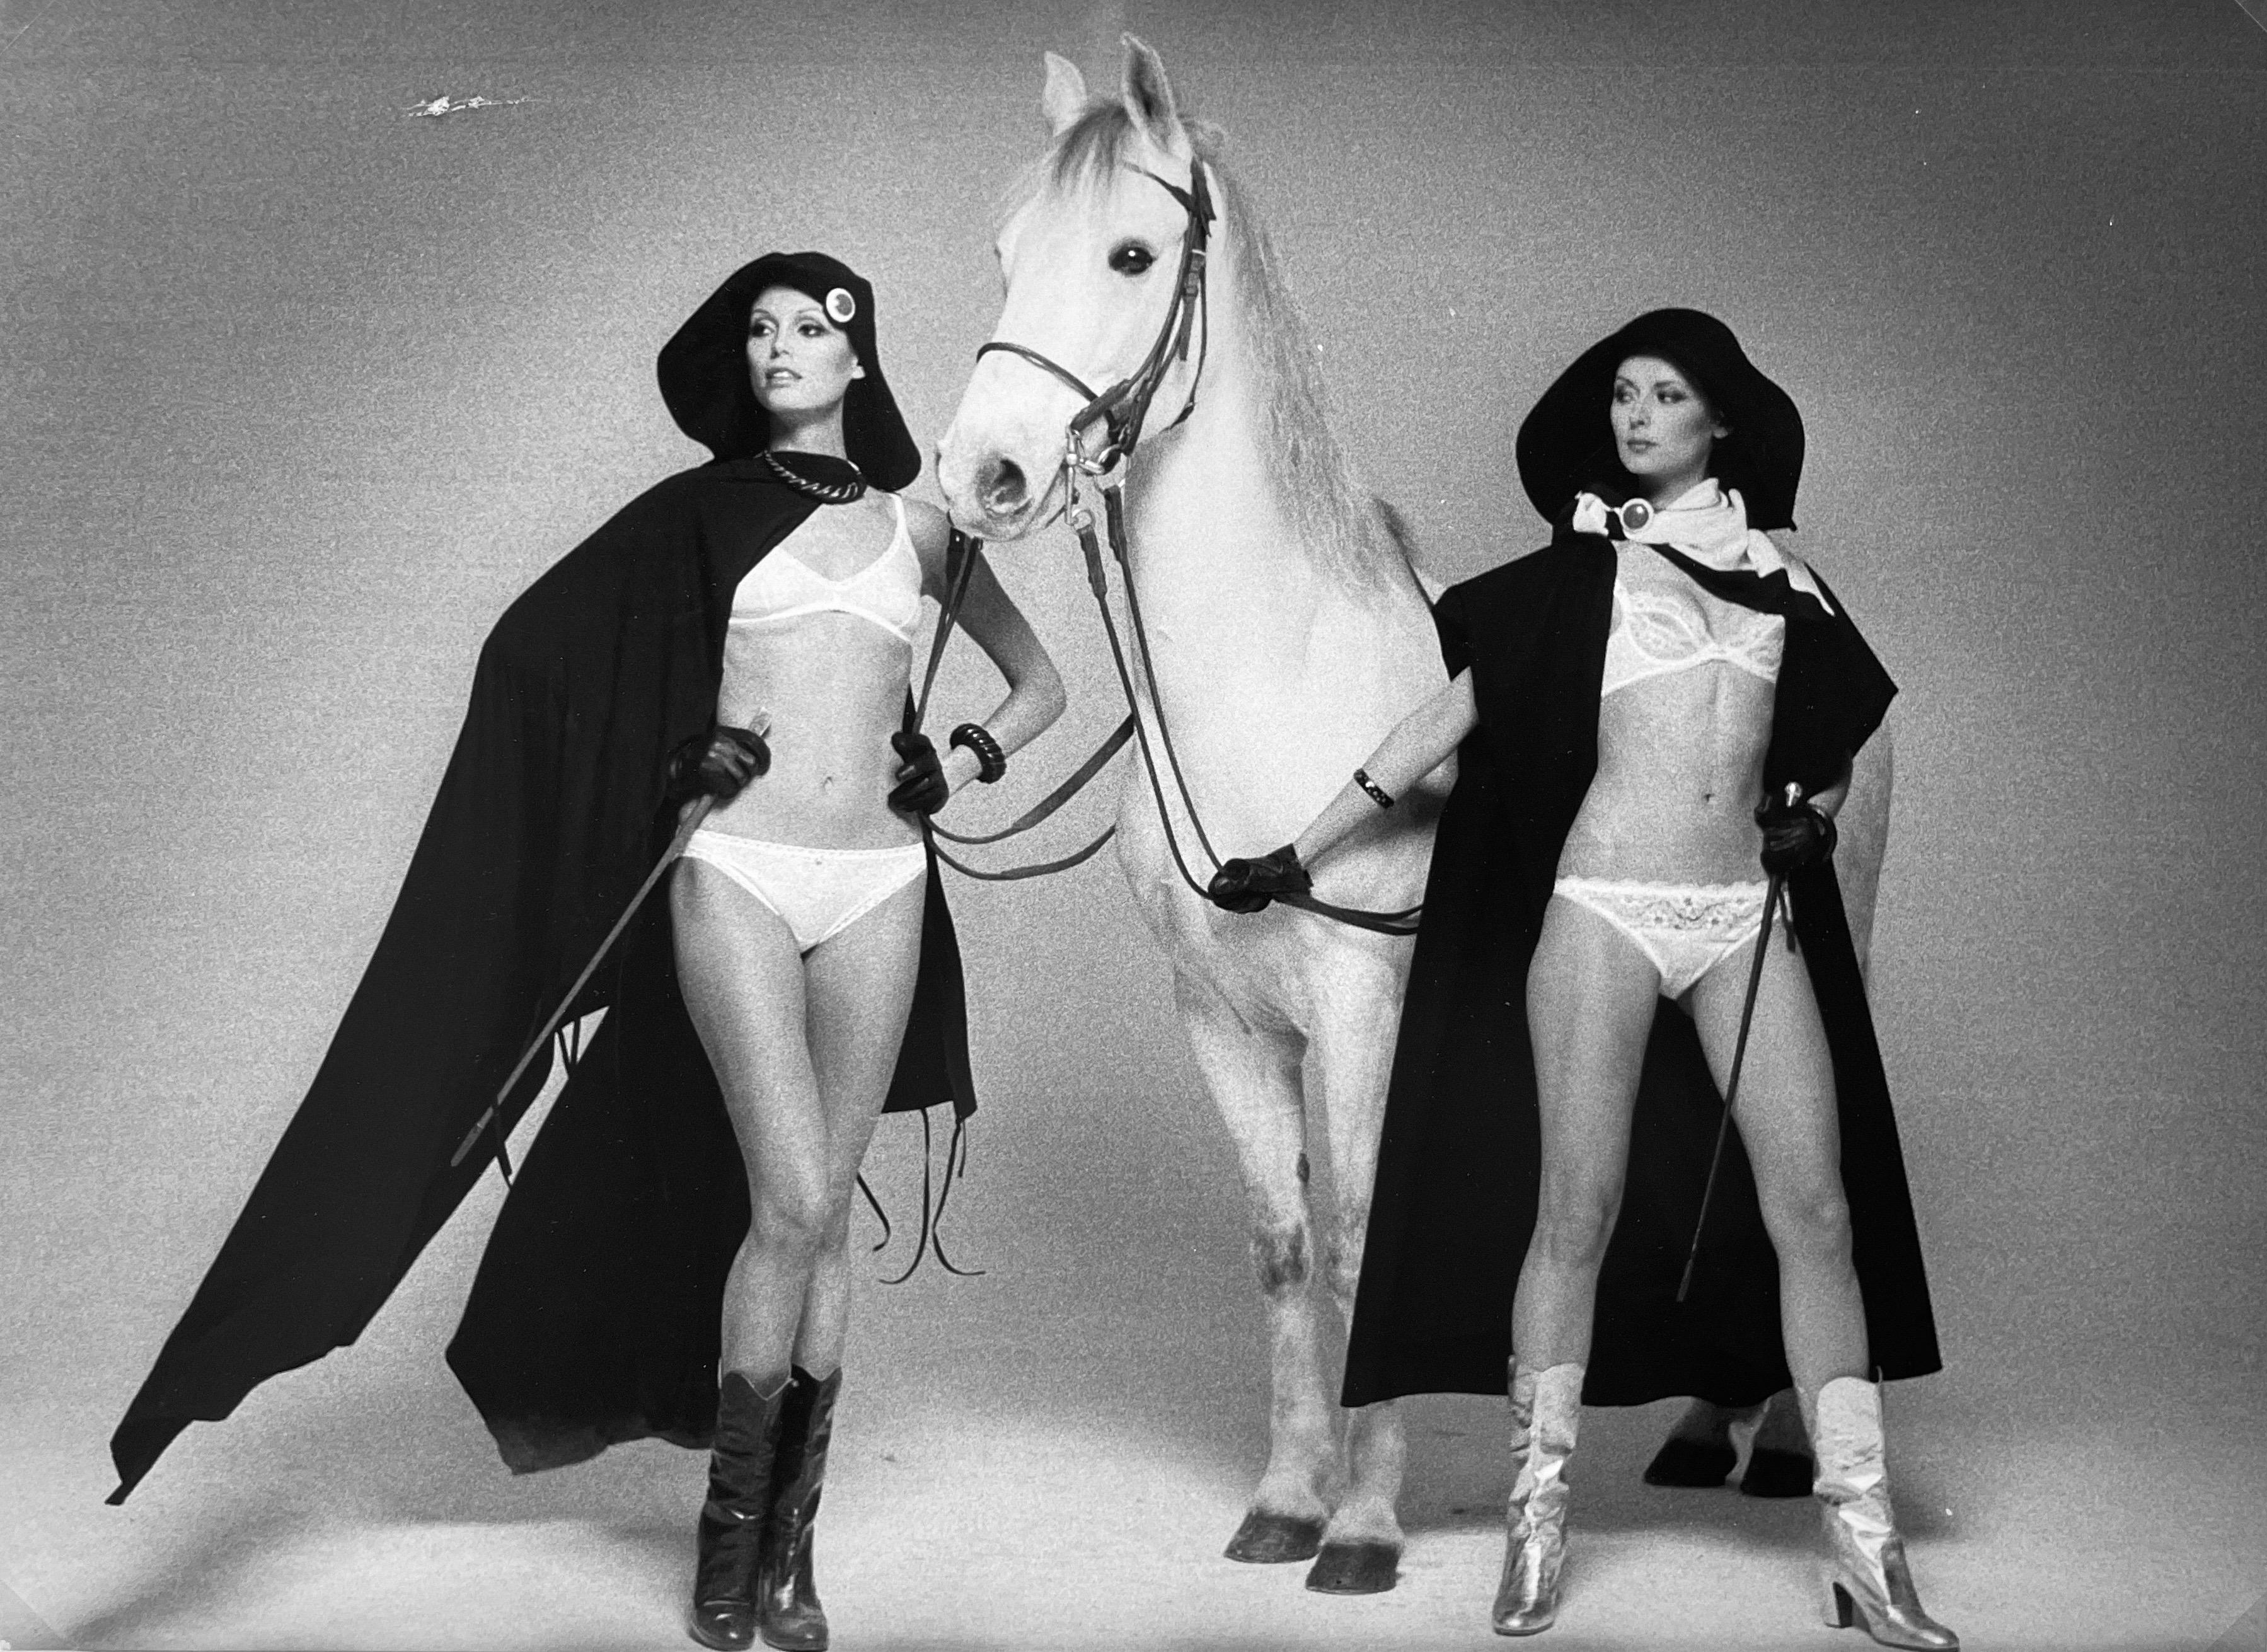 Chris von Wangenheim Black and White Photograph - Untitled (Two Models with horse), 1975